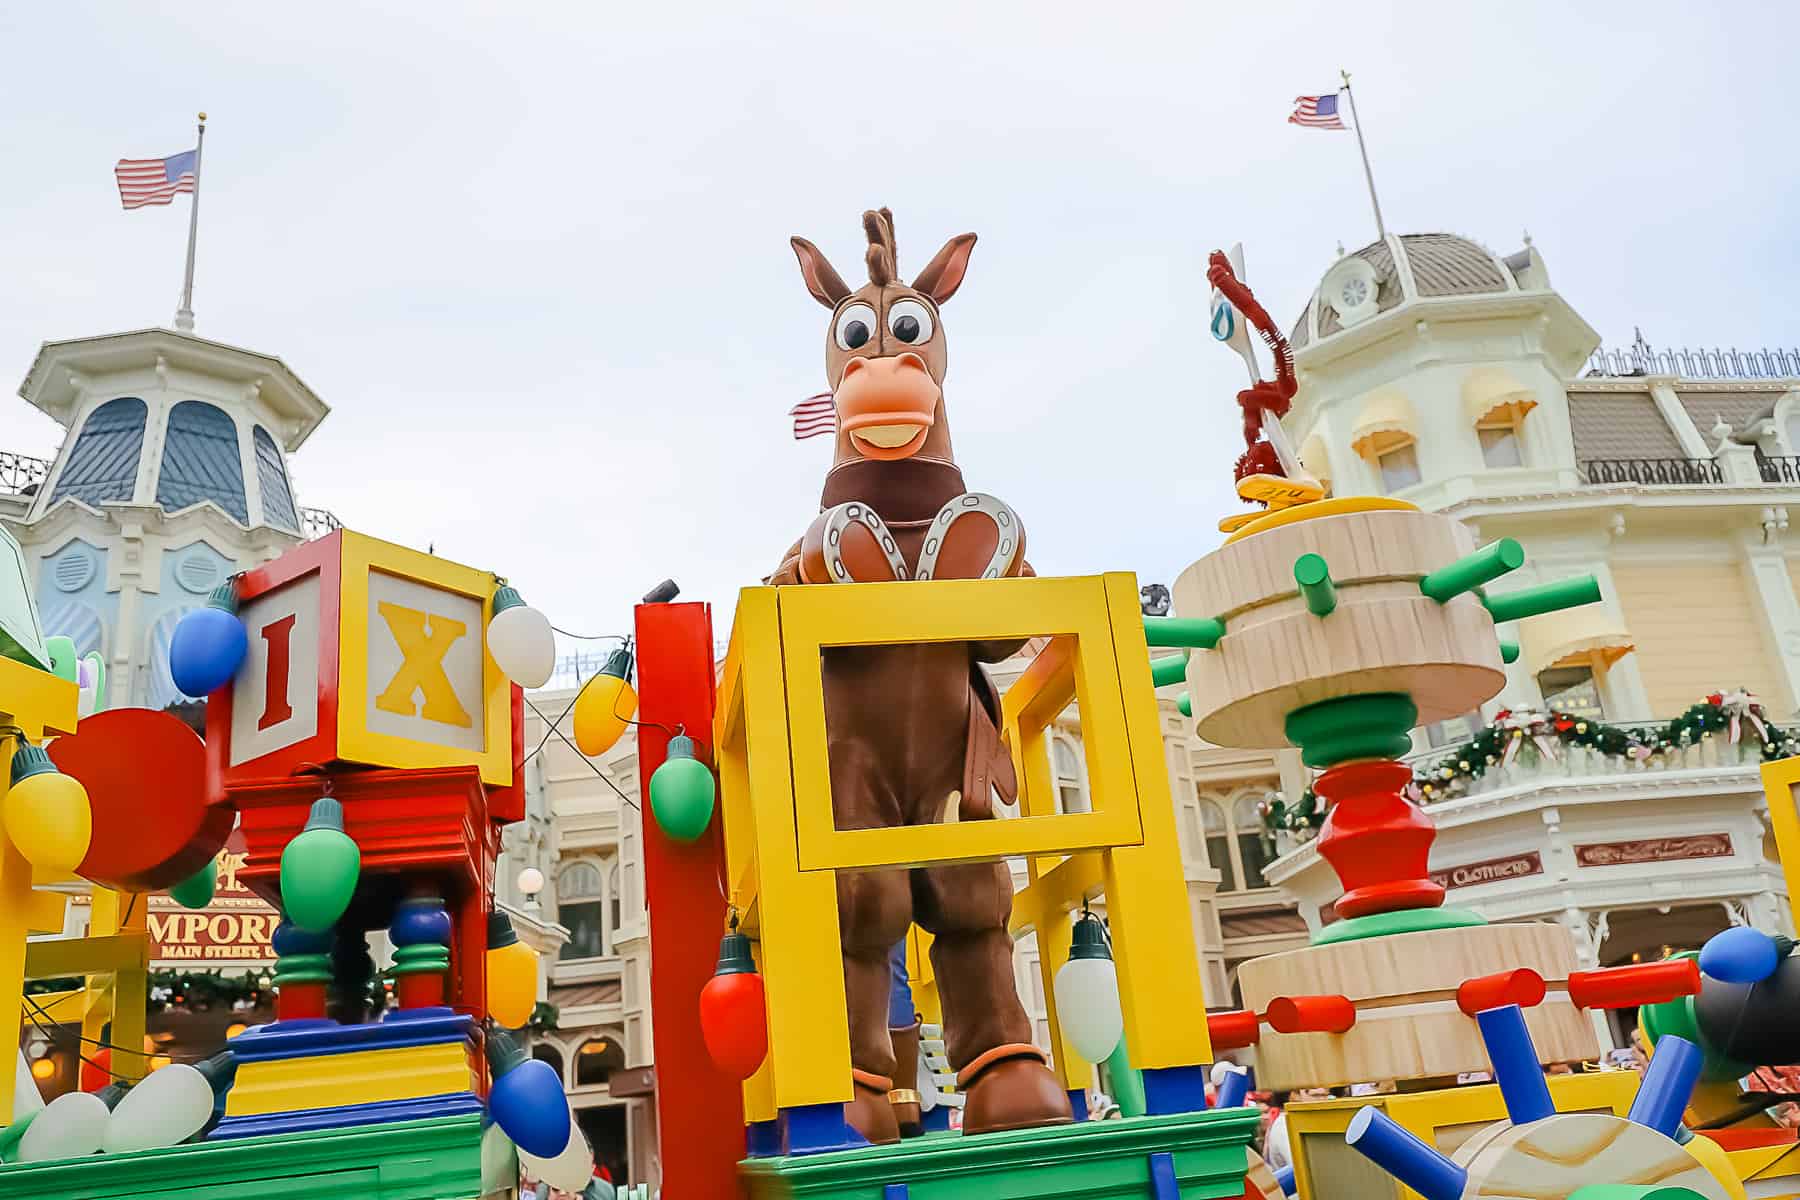 Bullseye perched on top of the Toy Story parade float.